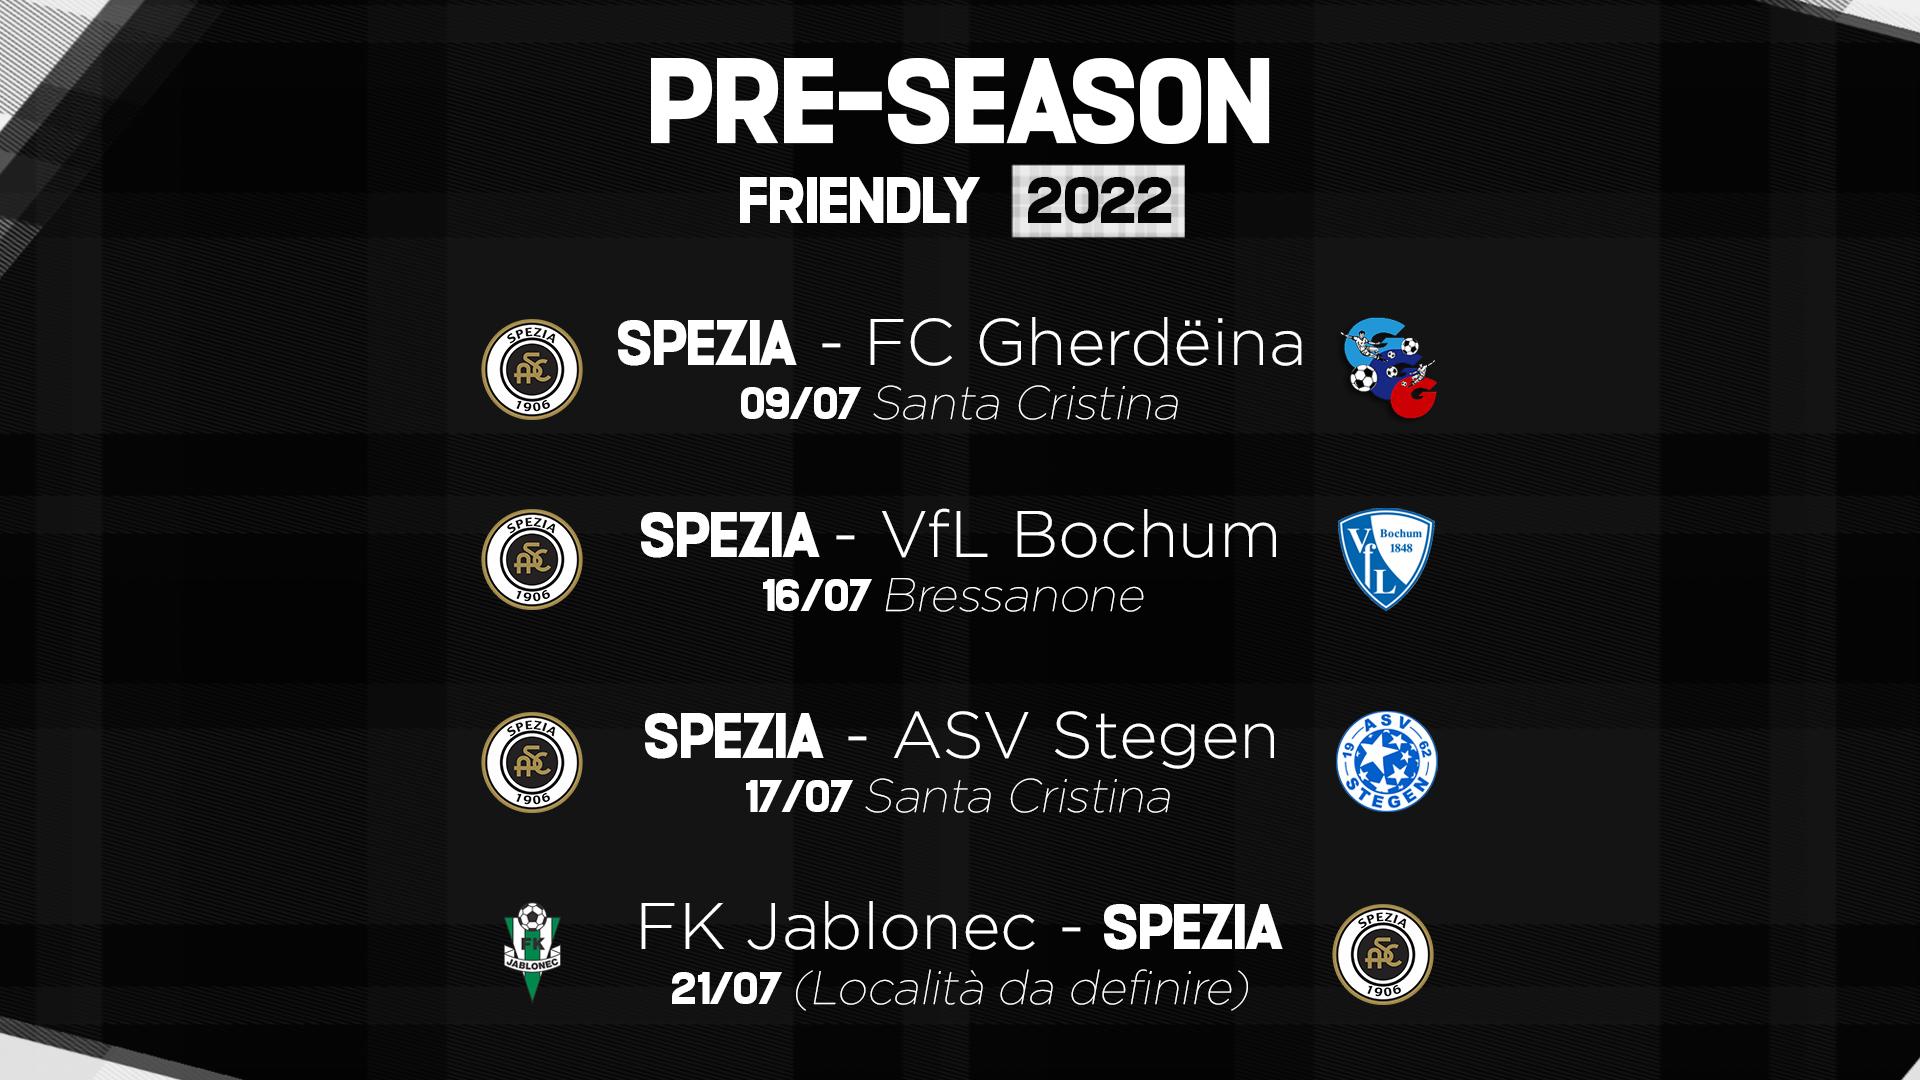 The schedule of the Eagles' friendly matches